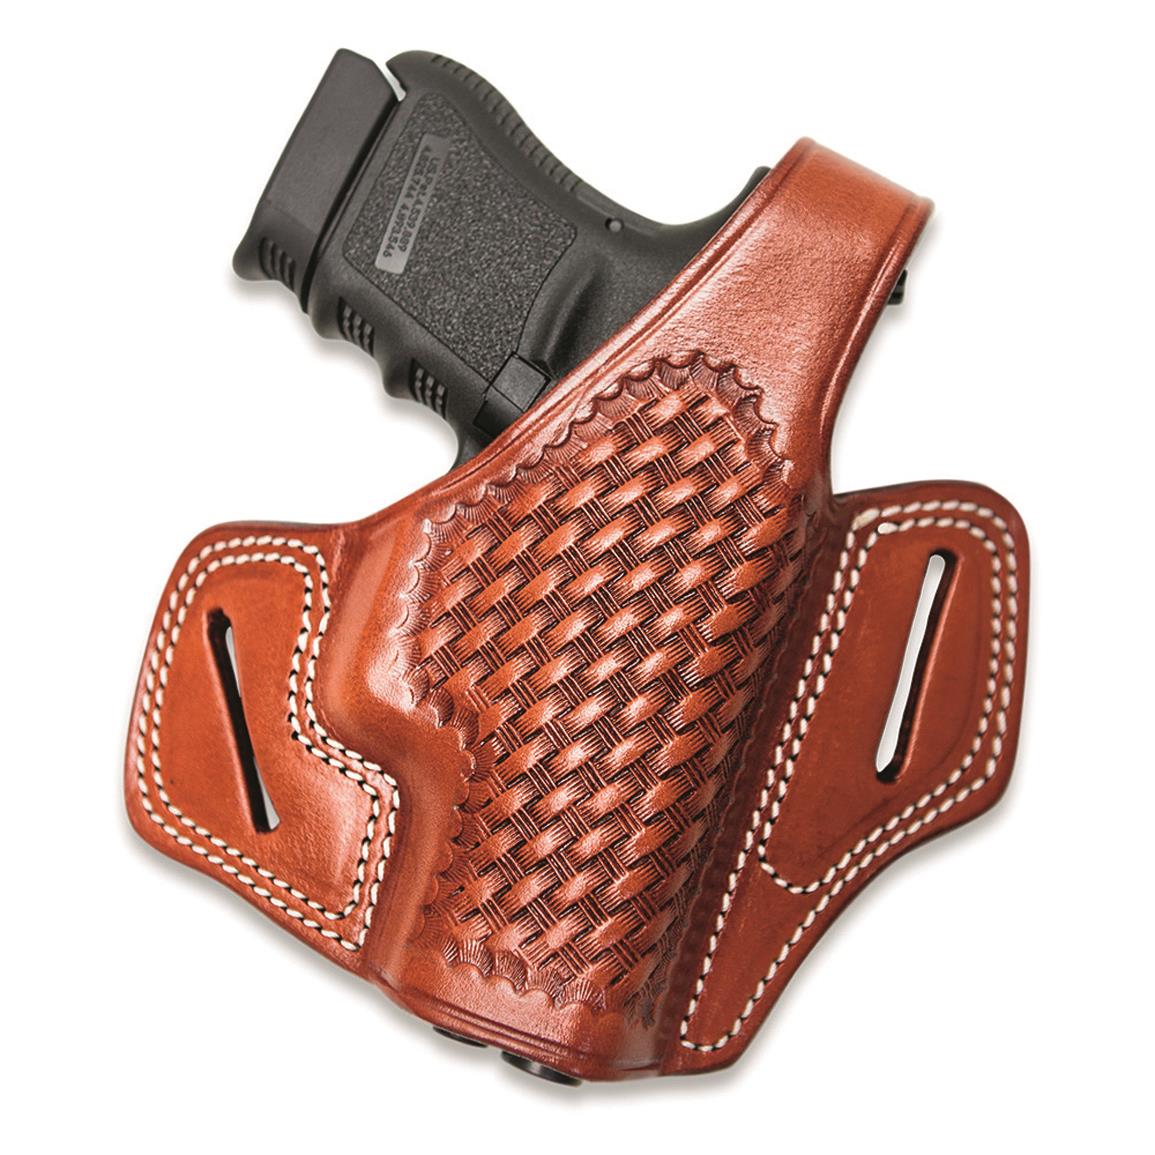 Cebeci Arms Leather Basketweave Belt-Slide OWB Pancake Holster, S&W M&P9 Shield, Right Hand